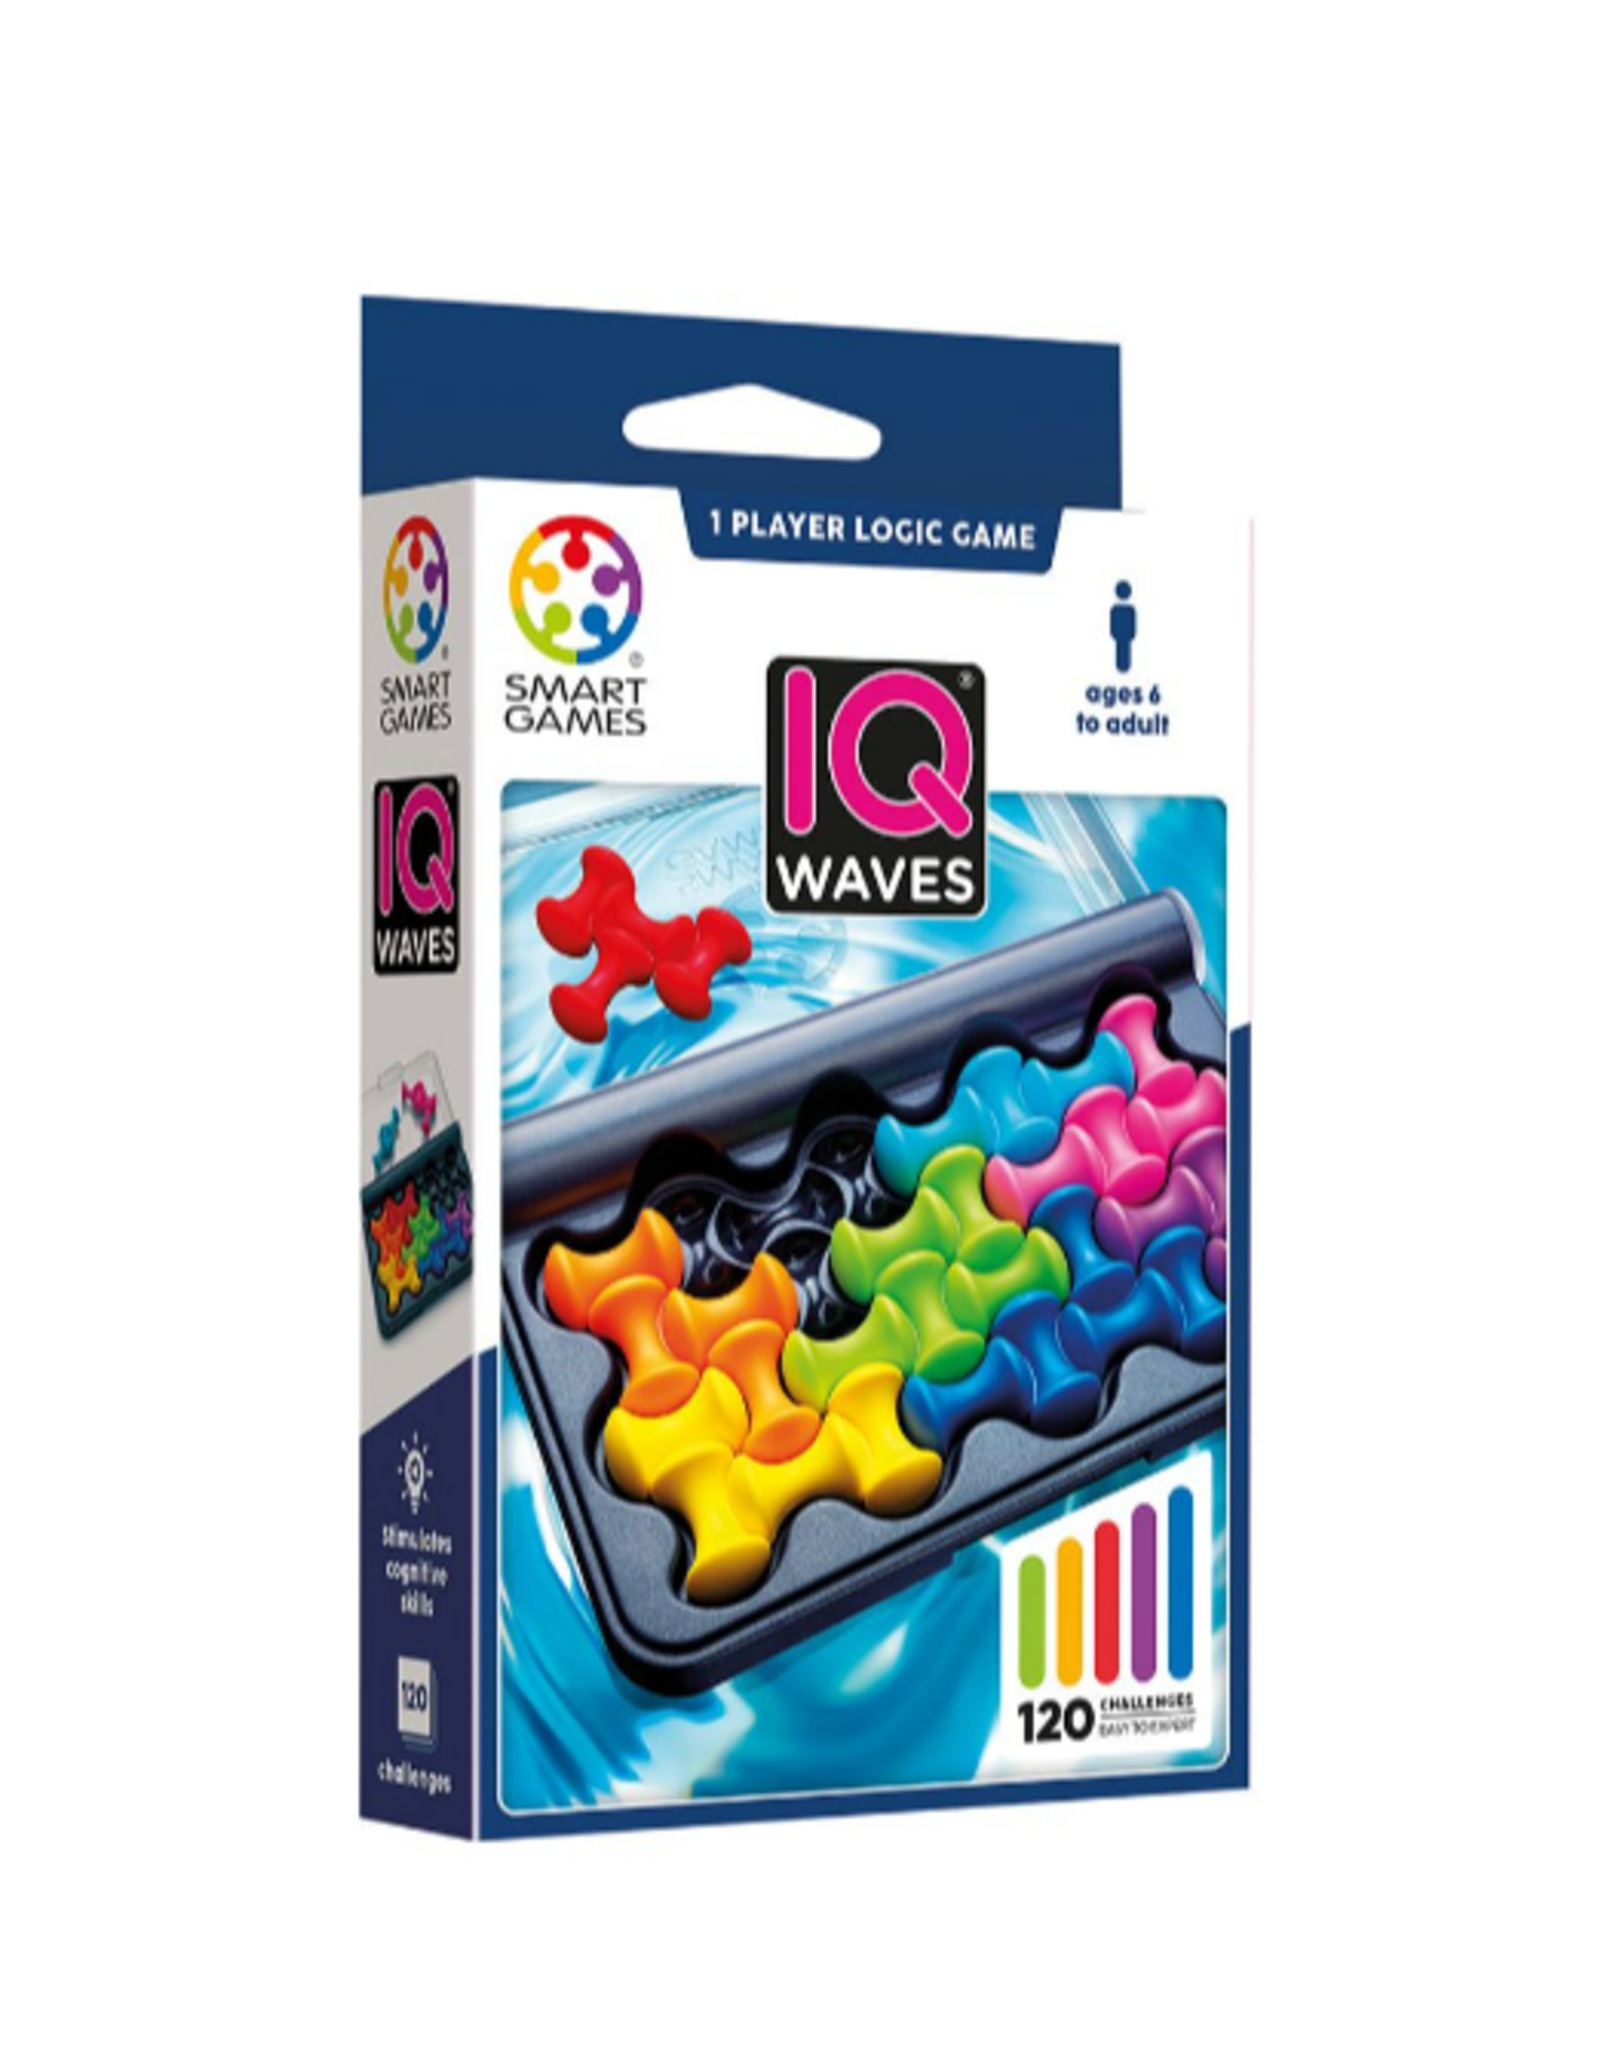 SMART TOYS GAMES IQ WAVES